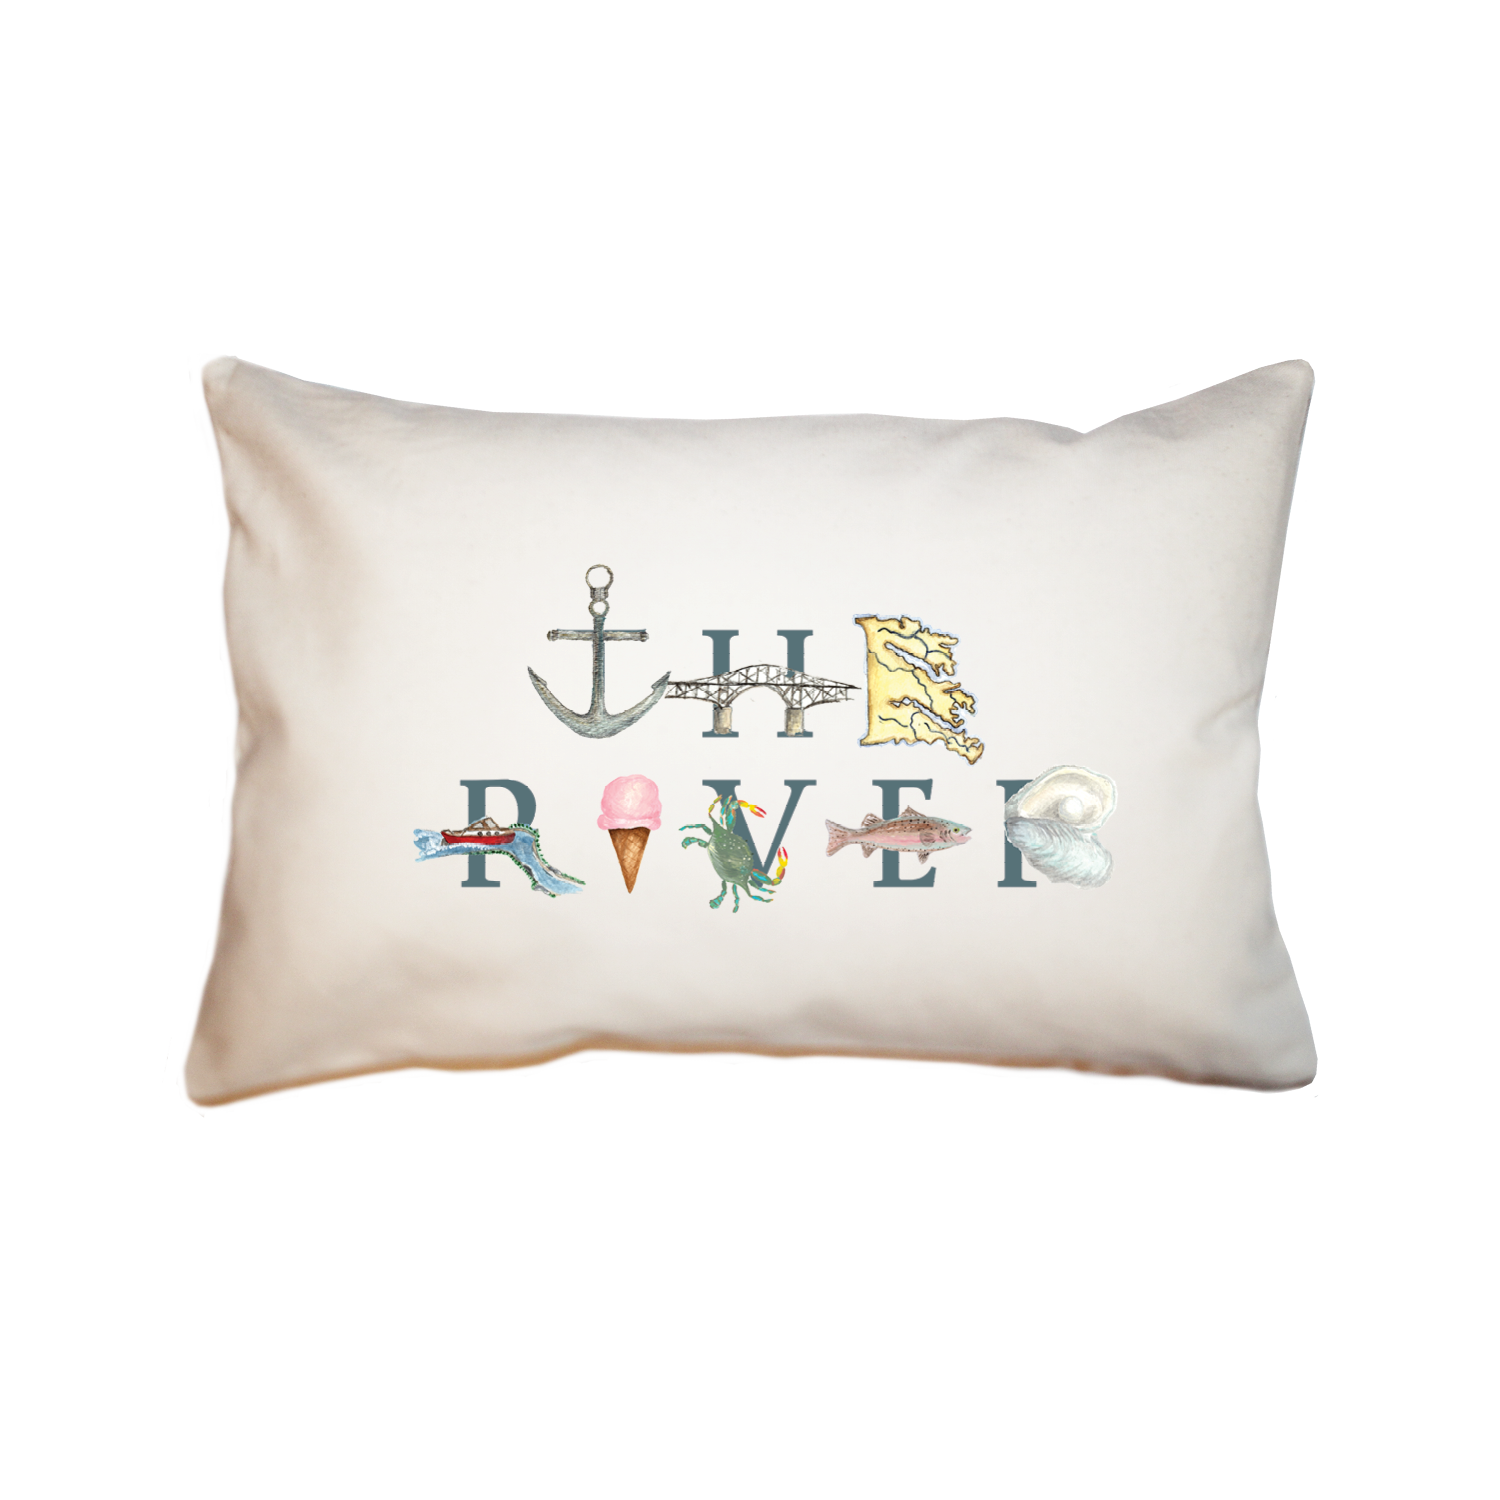 The River large rectangle pillow